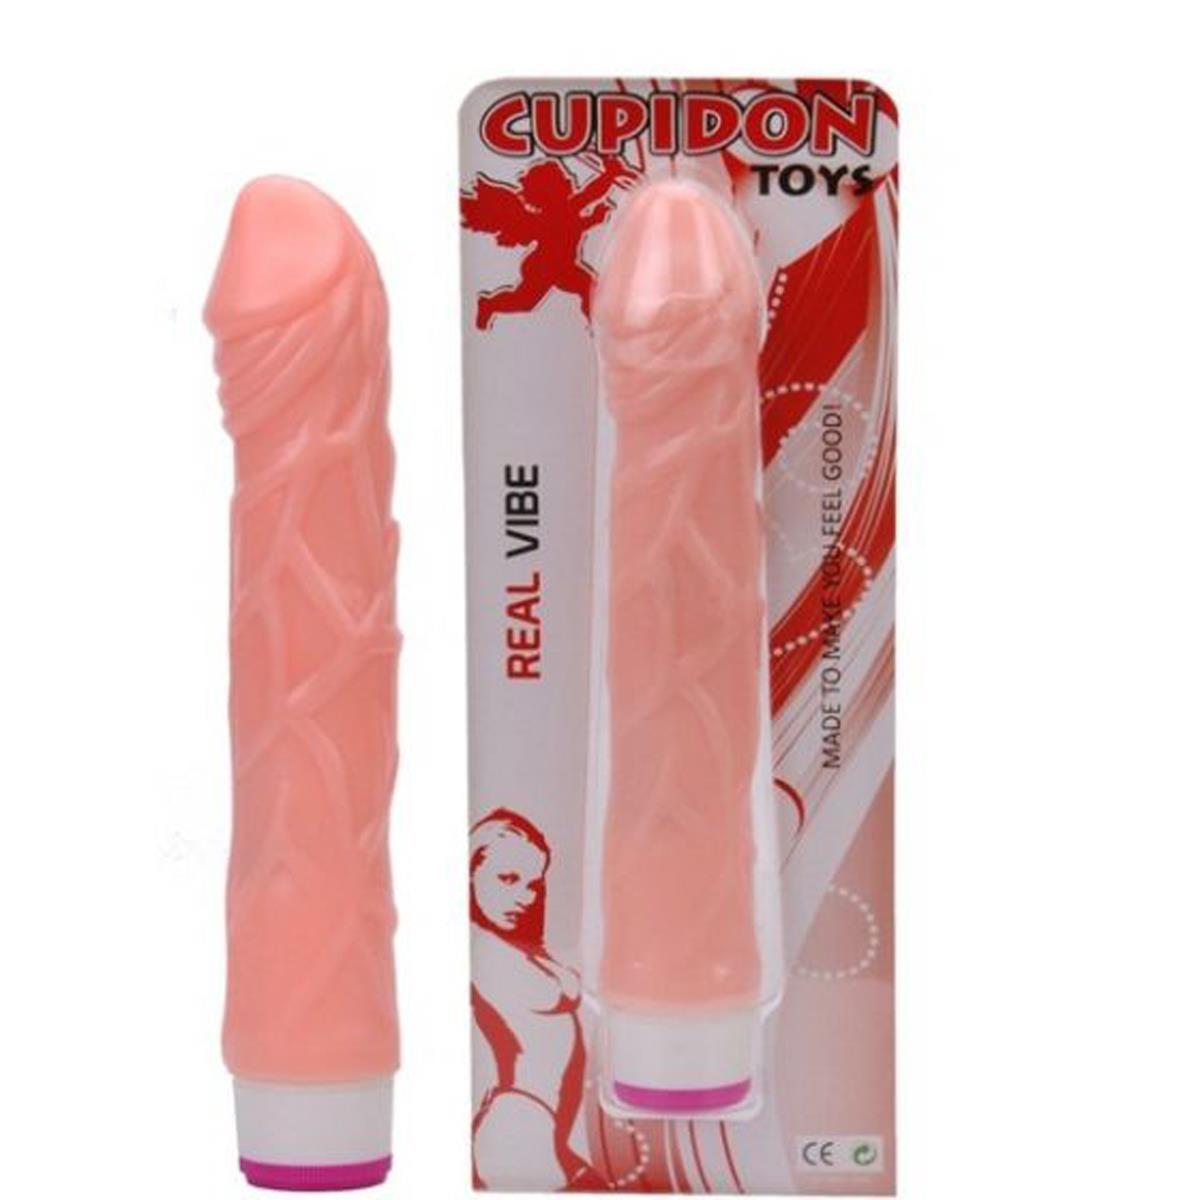 Cupidon Toys Real Vibe K Import & Export